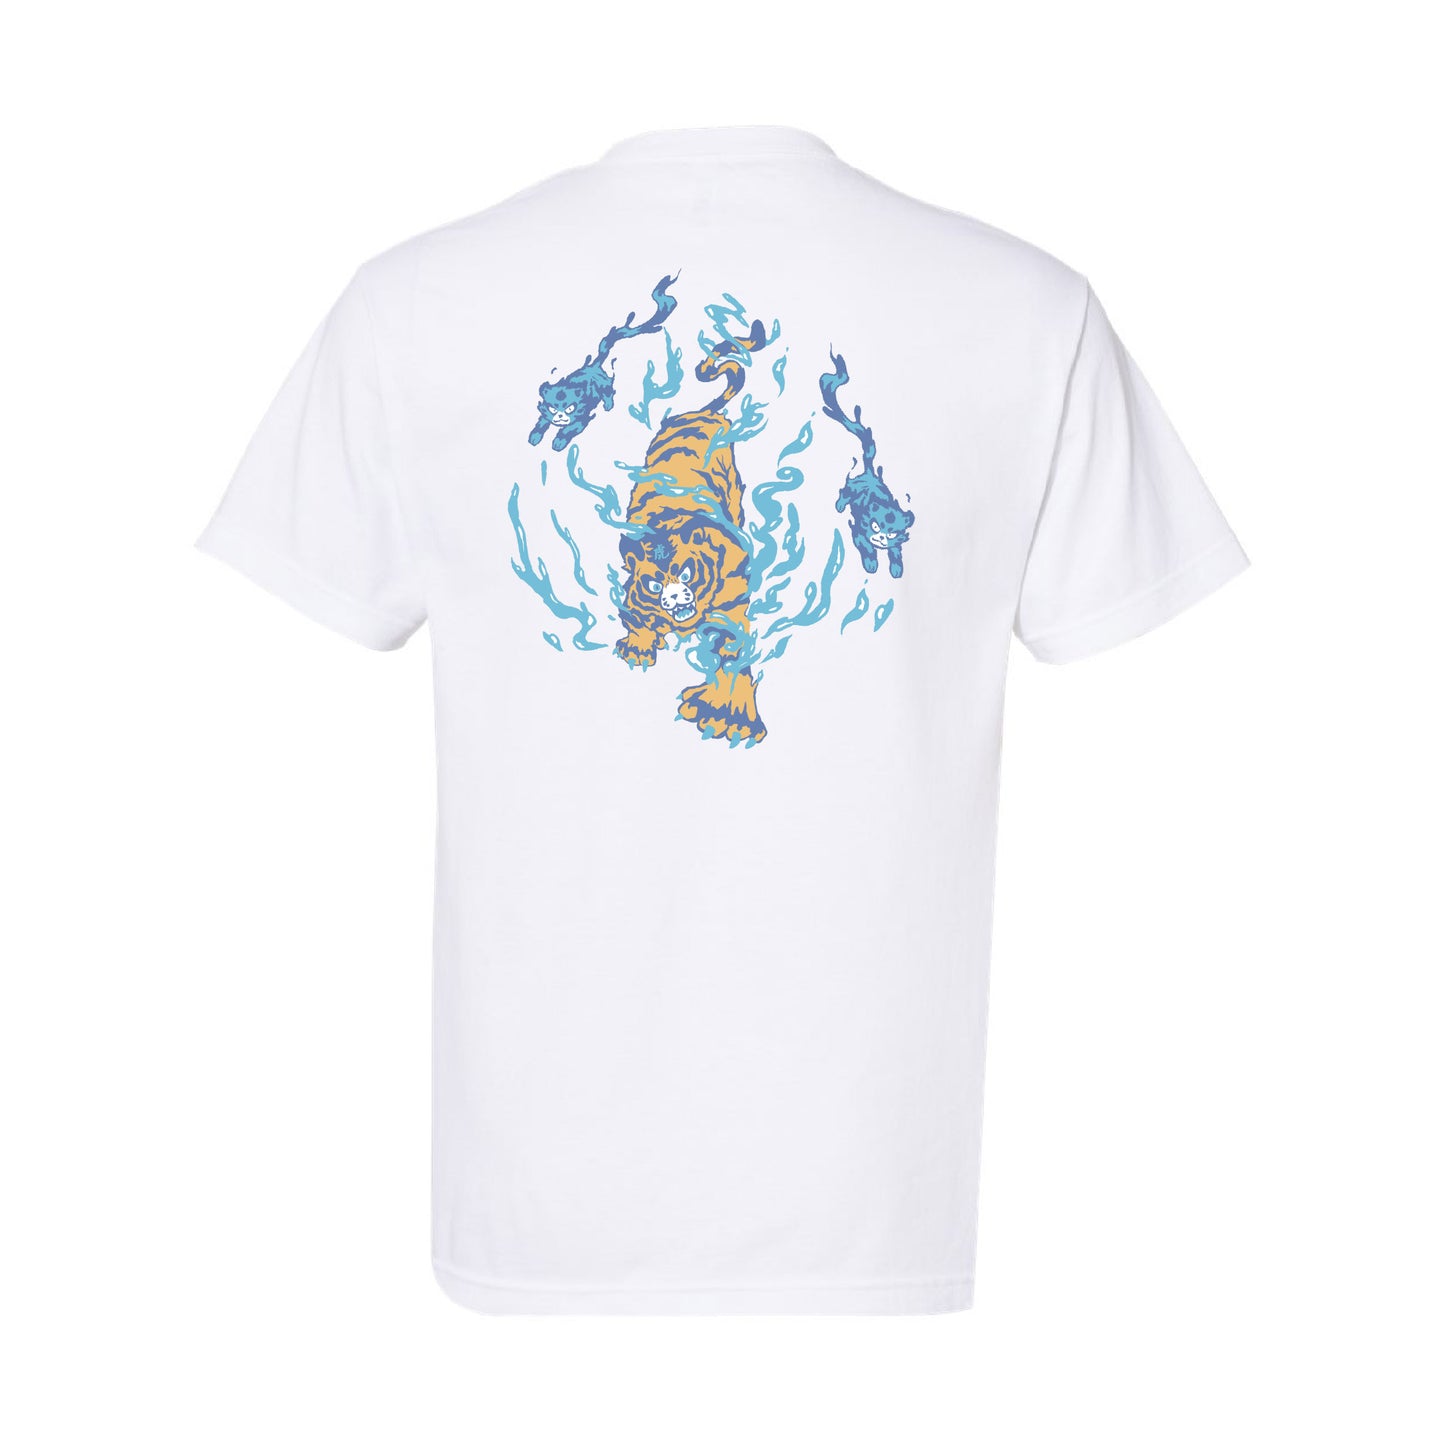 Year of the Water Tiger T-Shirt - White